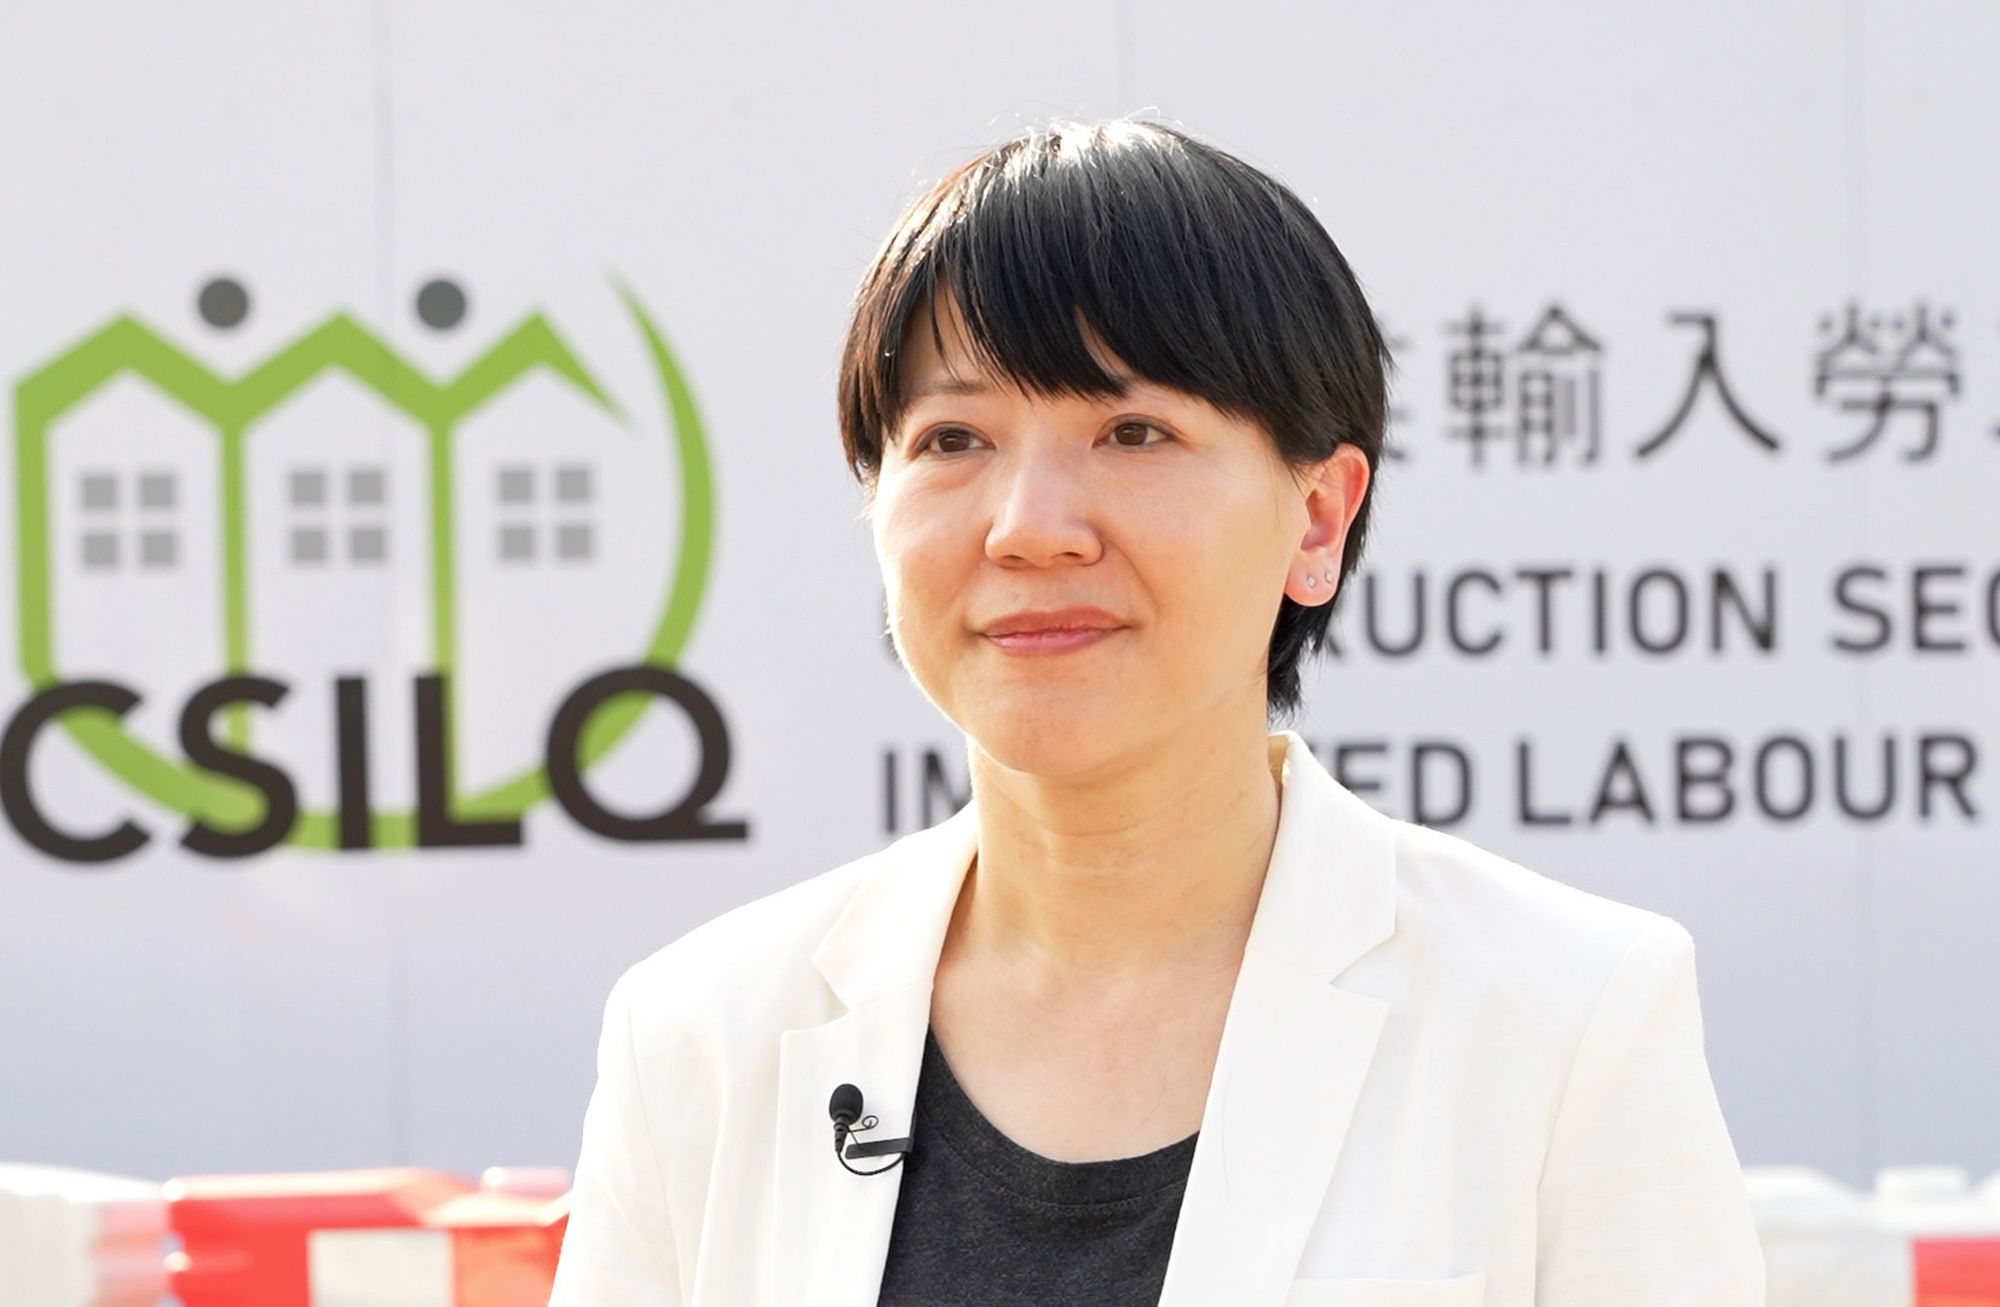 Principal Assistant Secretary (Works) of the DEVB, Mrs WONG HO Wing-sze, Susanne, says that same as local workers, employee benefits of imported workers are protected under relevant labour legislation of Hong Kong. Besides, imported workers must abide by Hong Kong’s safety regulations. 